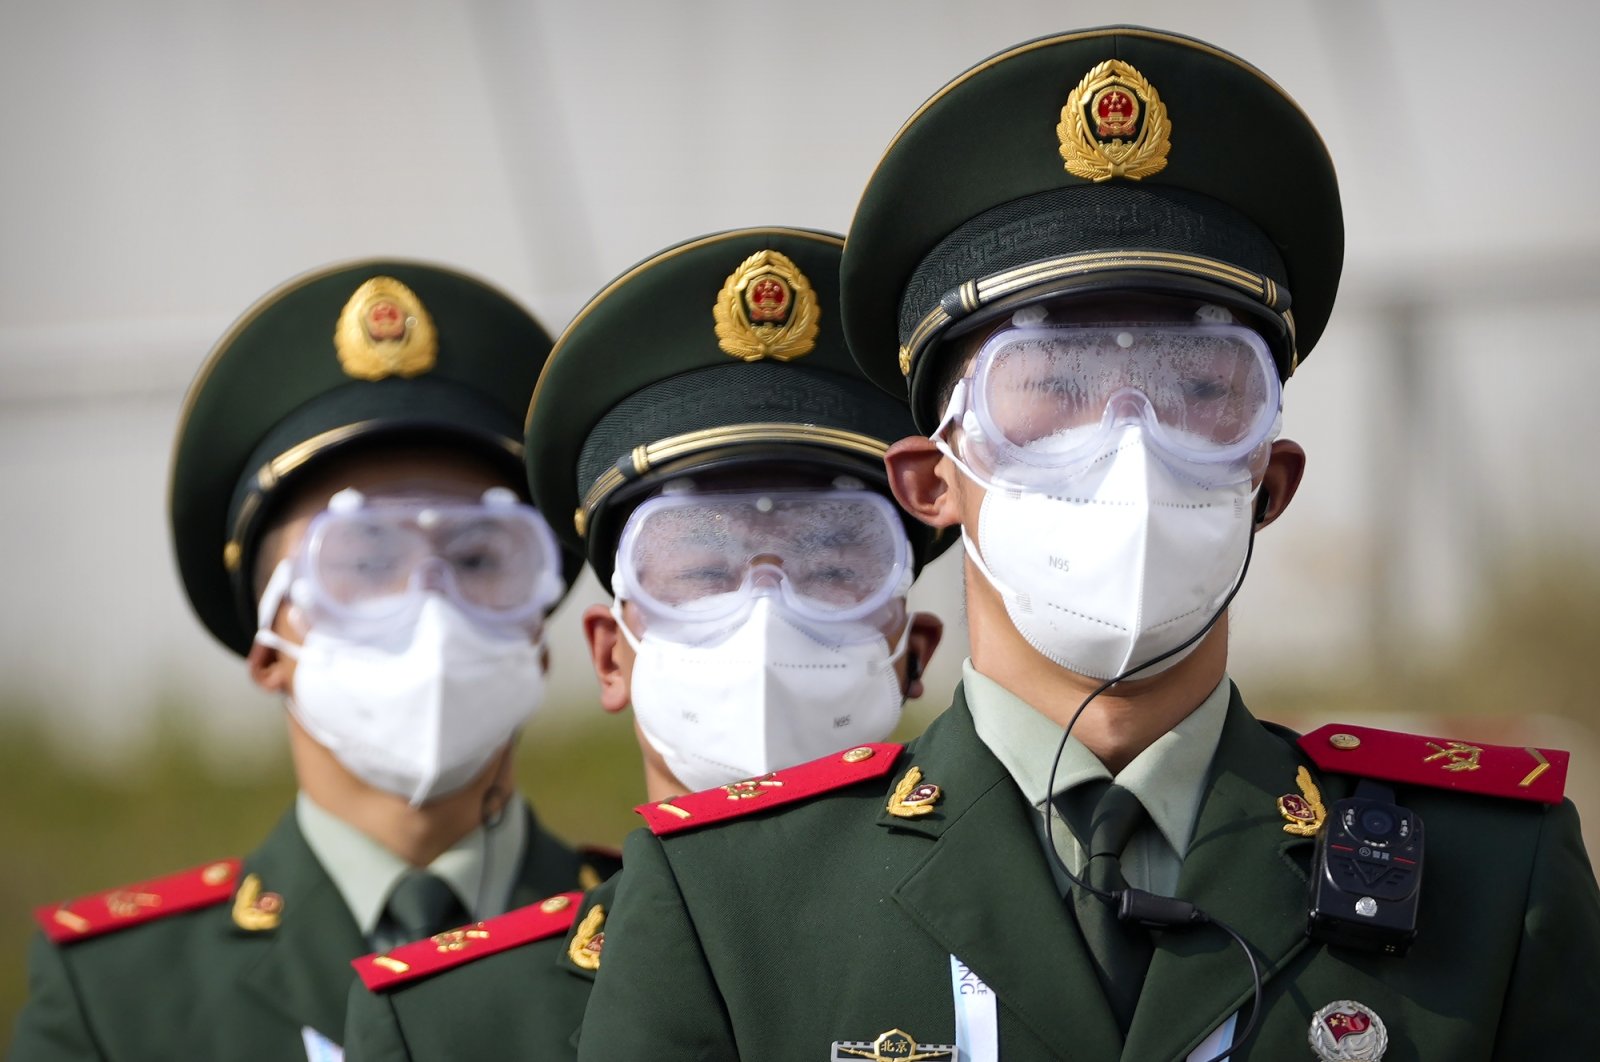 Chinese paramilitary police in goggles and face masks march during a 2022 Winter Olympics test event, Beijing, China, Oct. 25, 2021. (AP Photo)